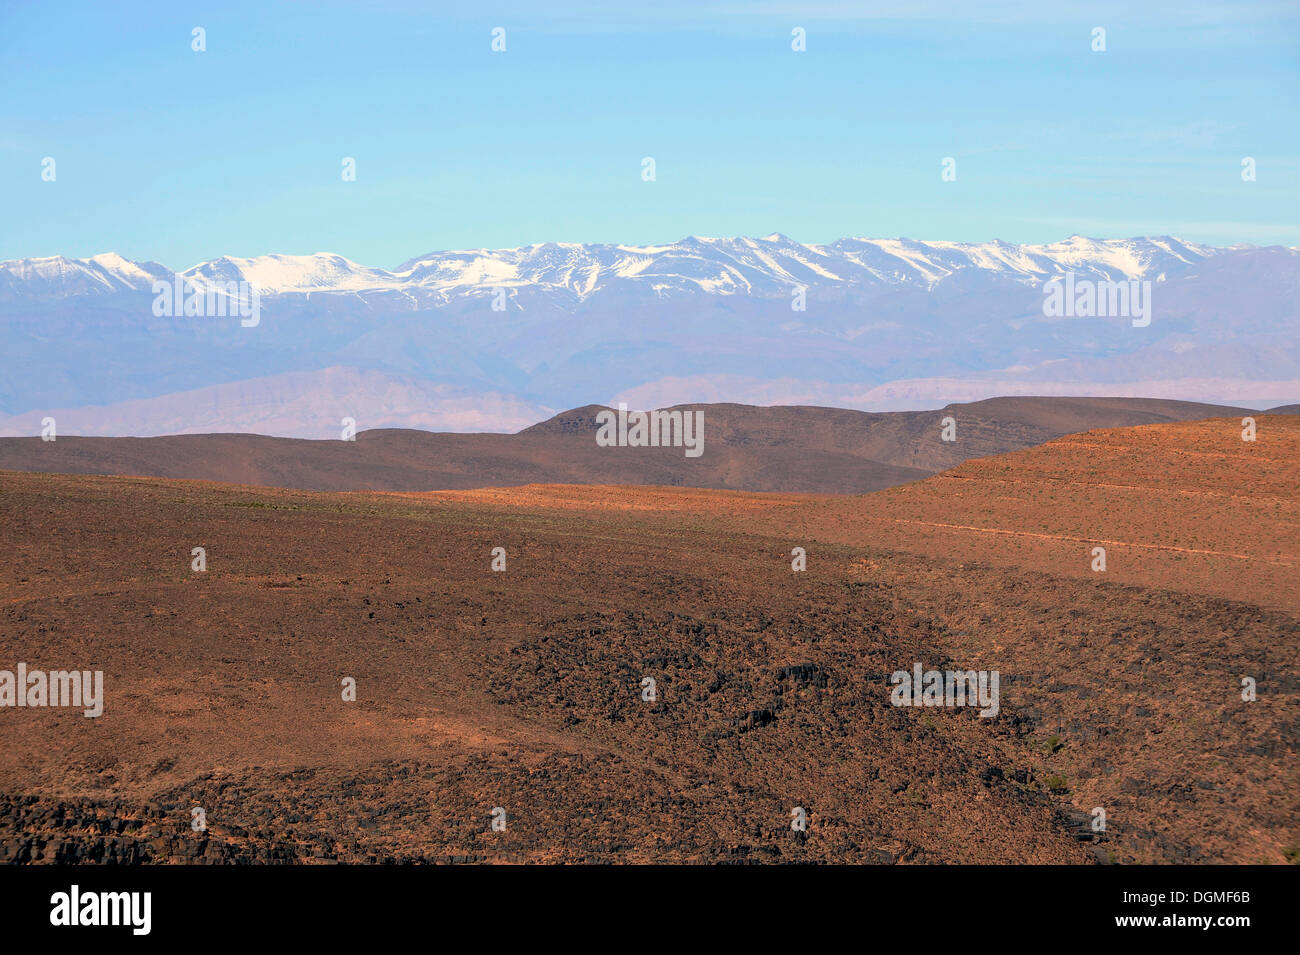 Mountain landscape, Atlas Mountains, southern Morocco, Morocco, Maghreb, North Africa, Africa Stock Photo